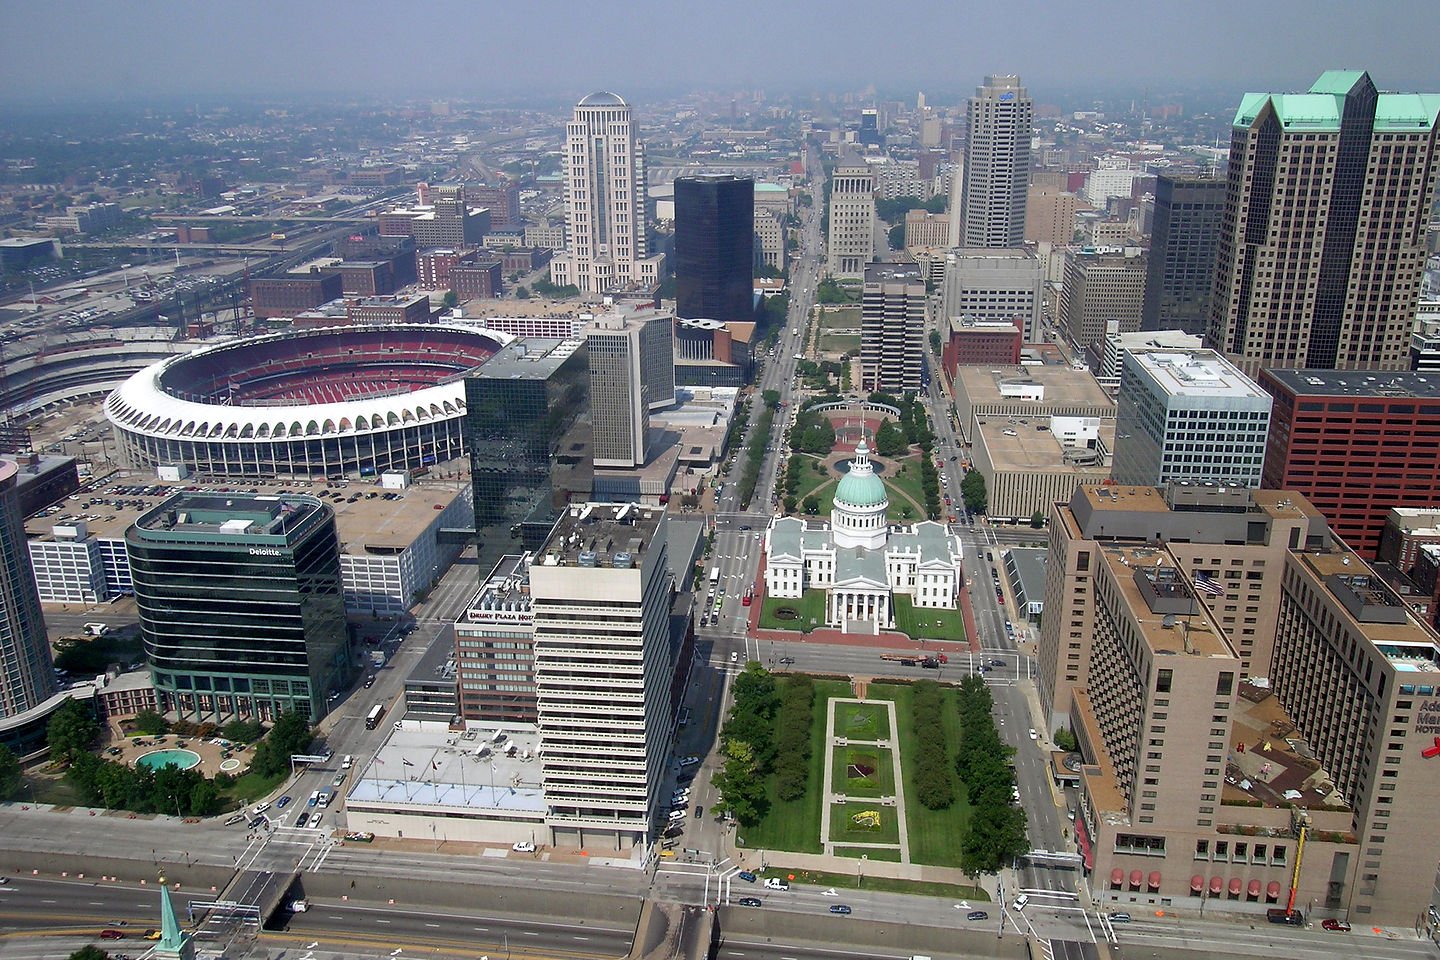 View from the top of the Arch